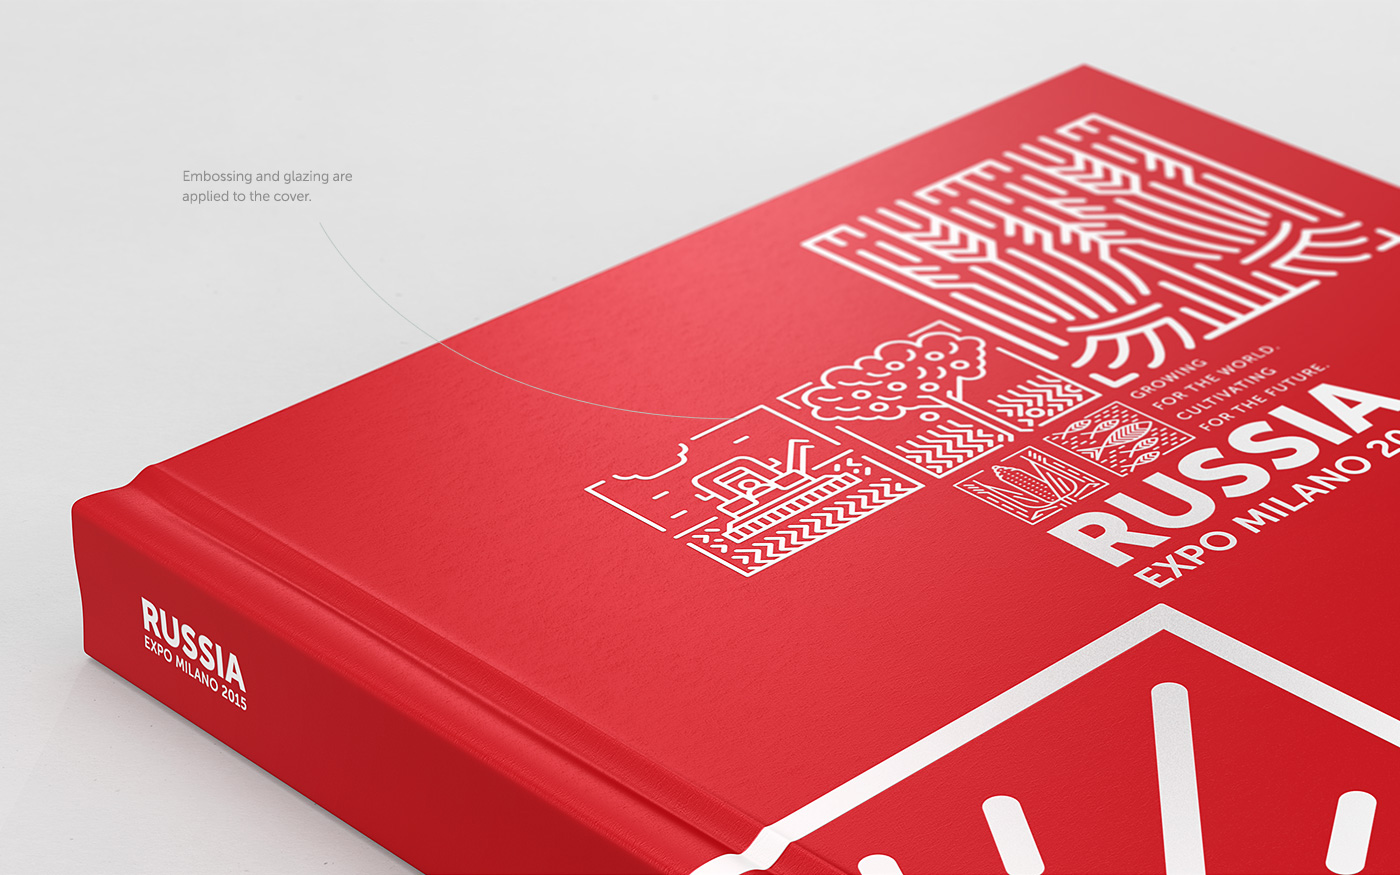 expo Russia red book Website milano expo 2015